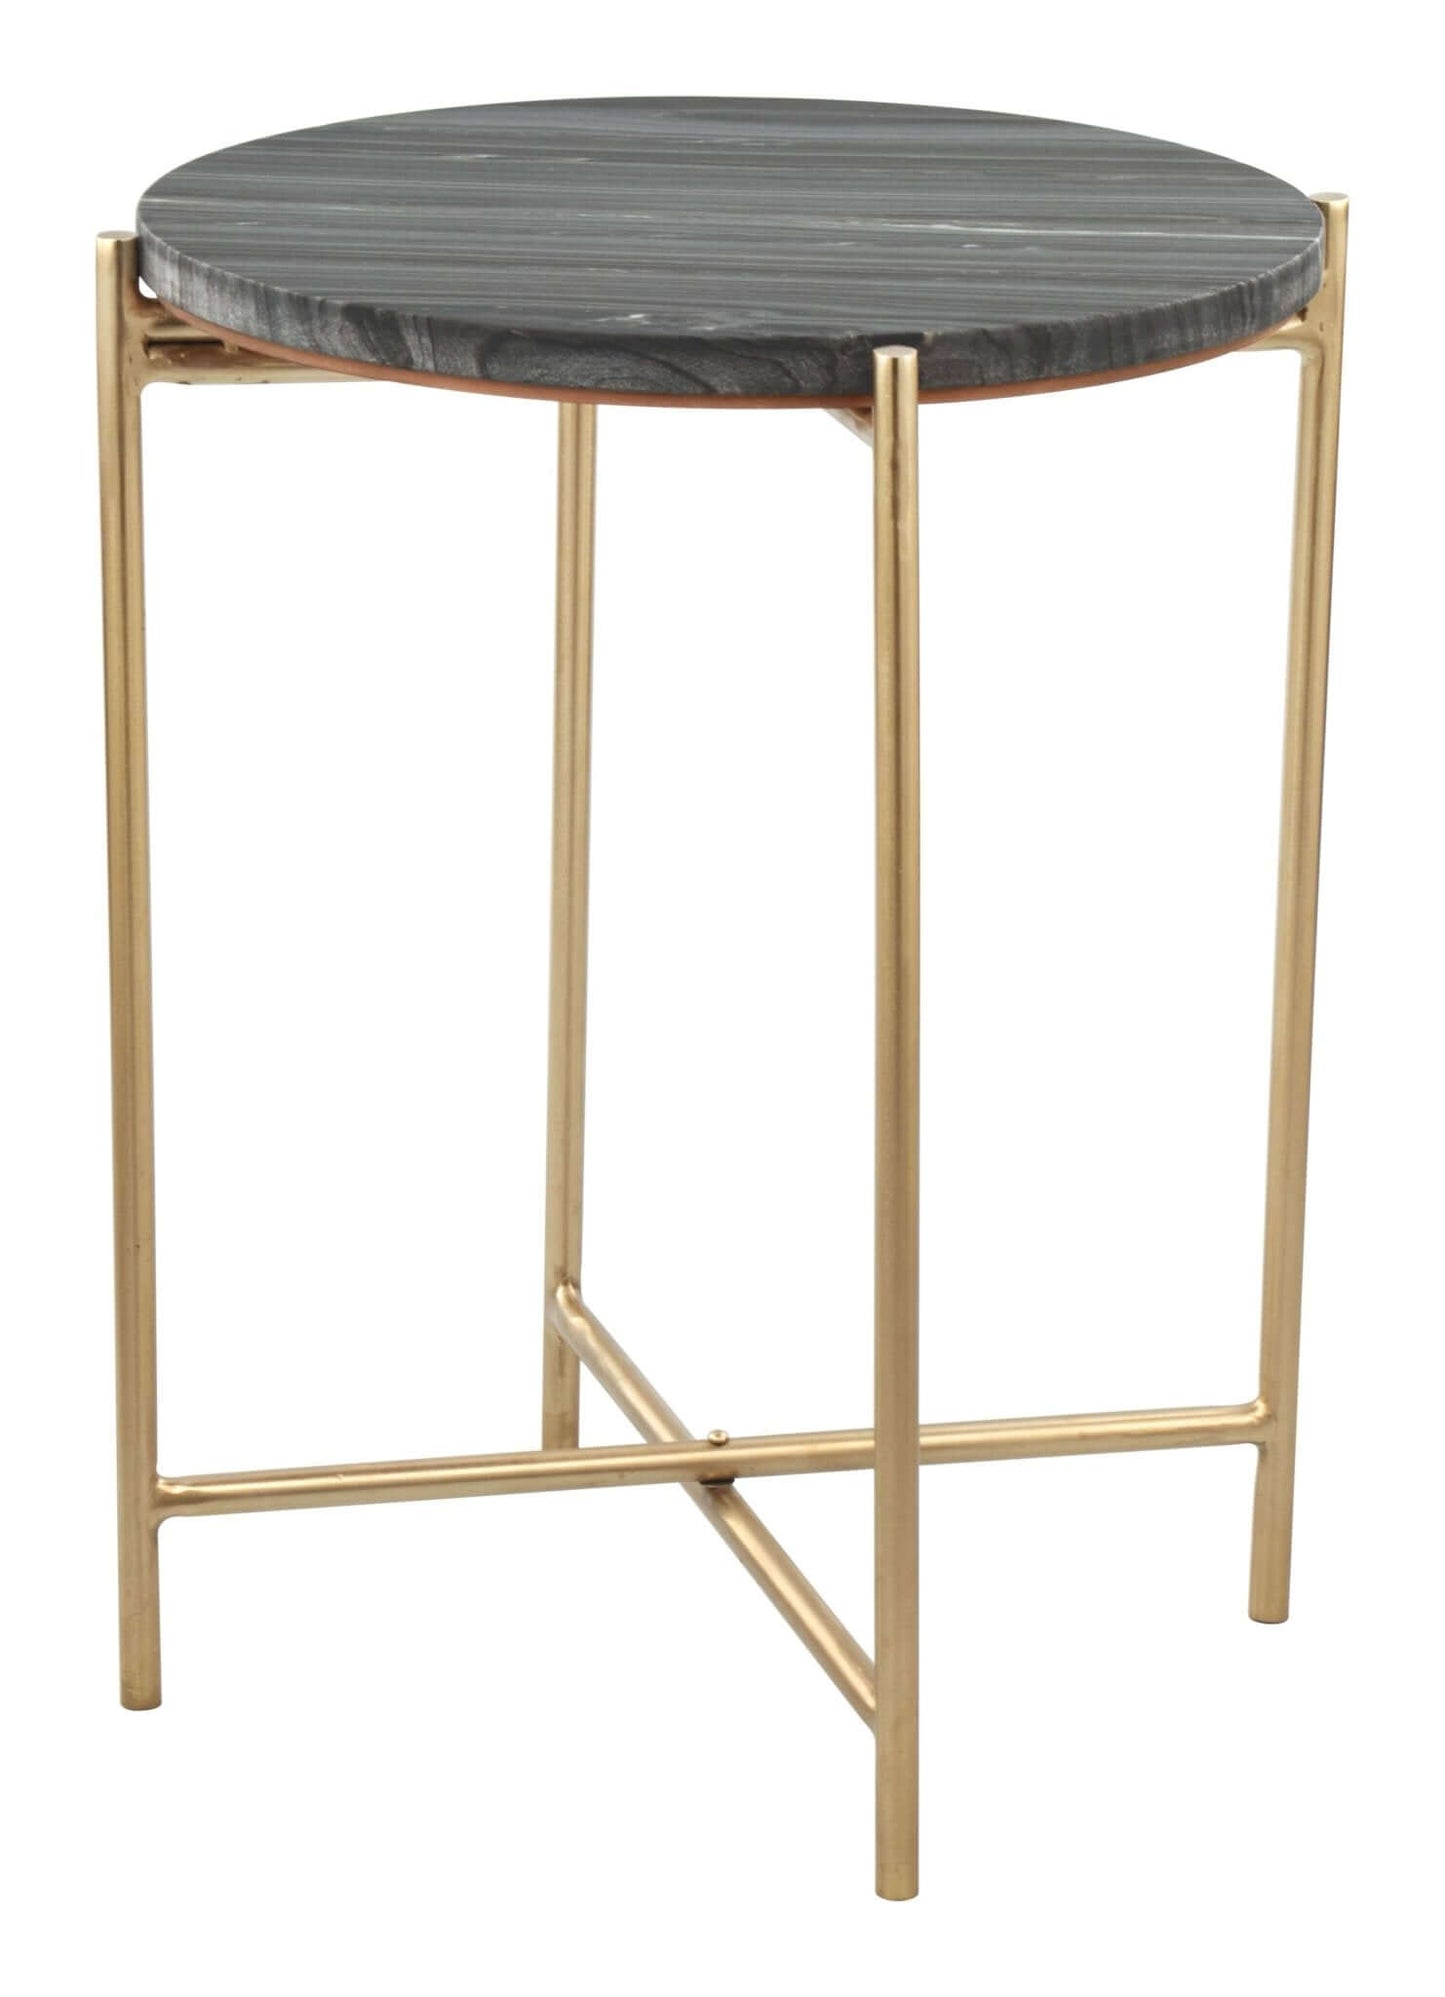 David End Table Marble Round Top in Gray & Gold - Revel Sofa 